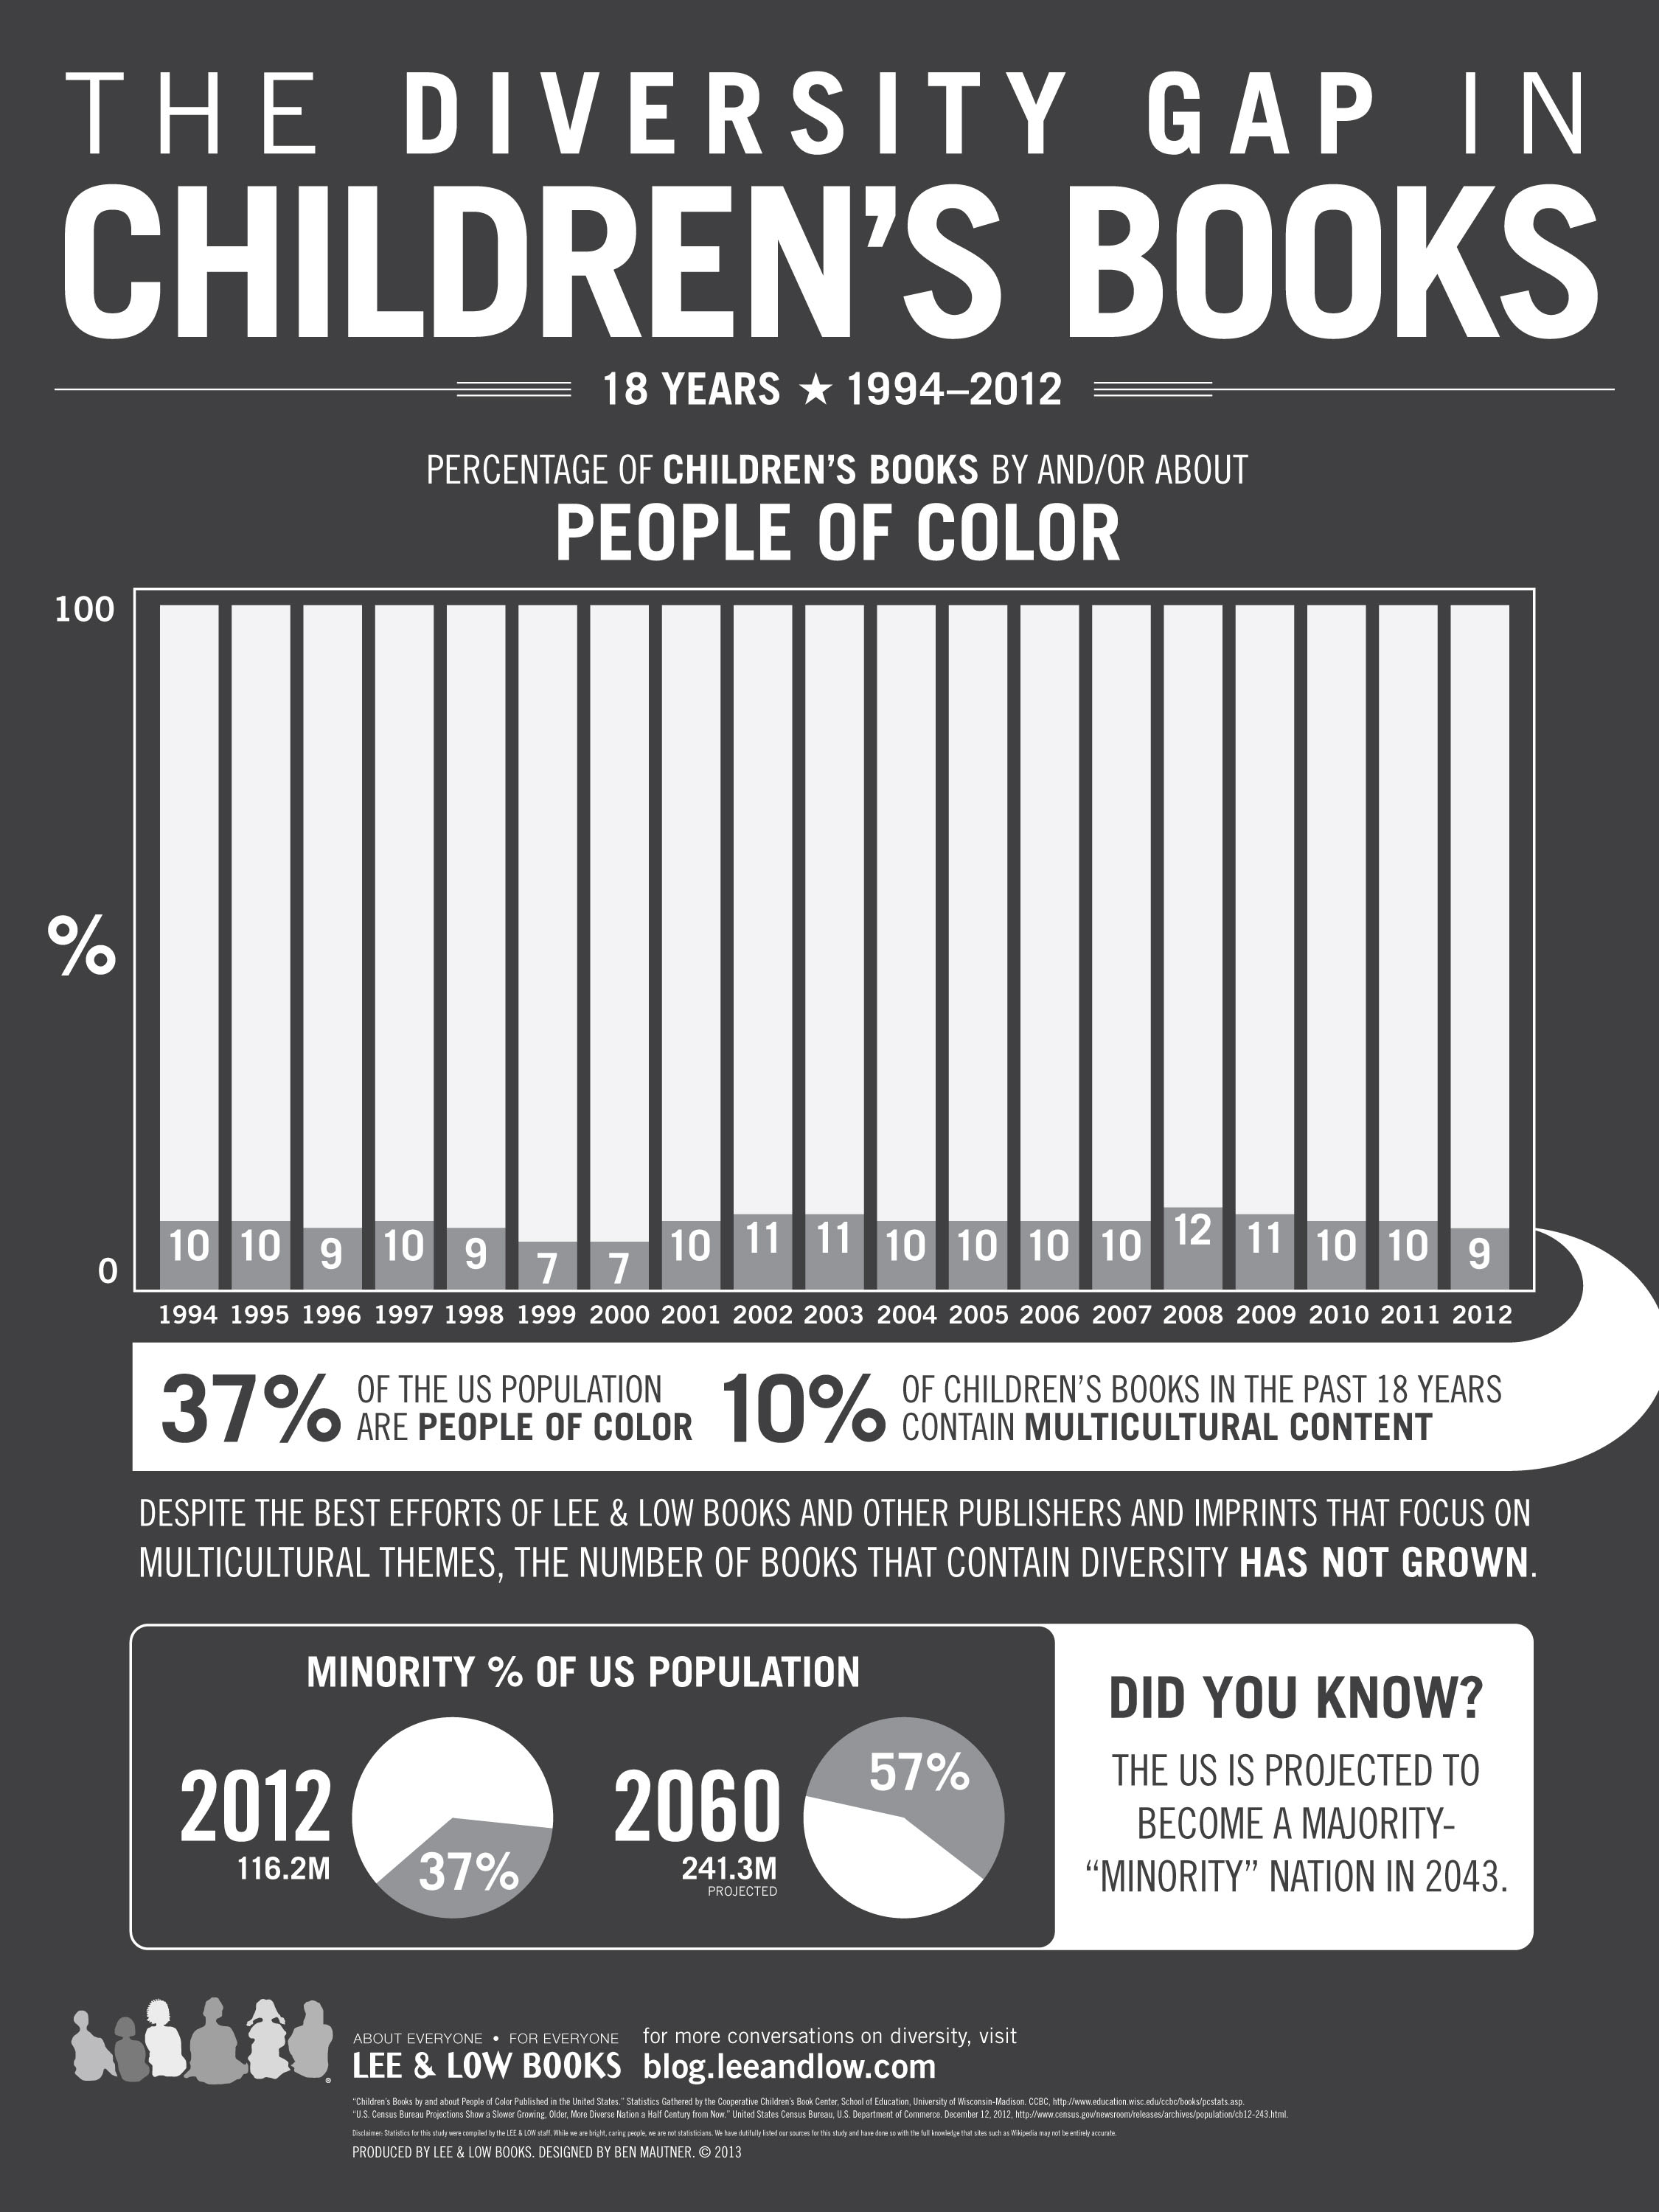 THE DIVERSITY GAP IN CHILDREN'S BOOKS : An infographic from Lee & Low Books